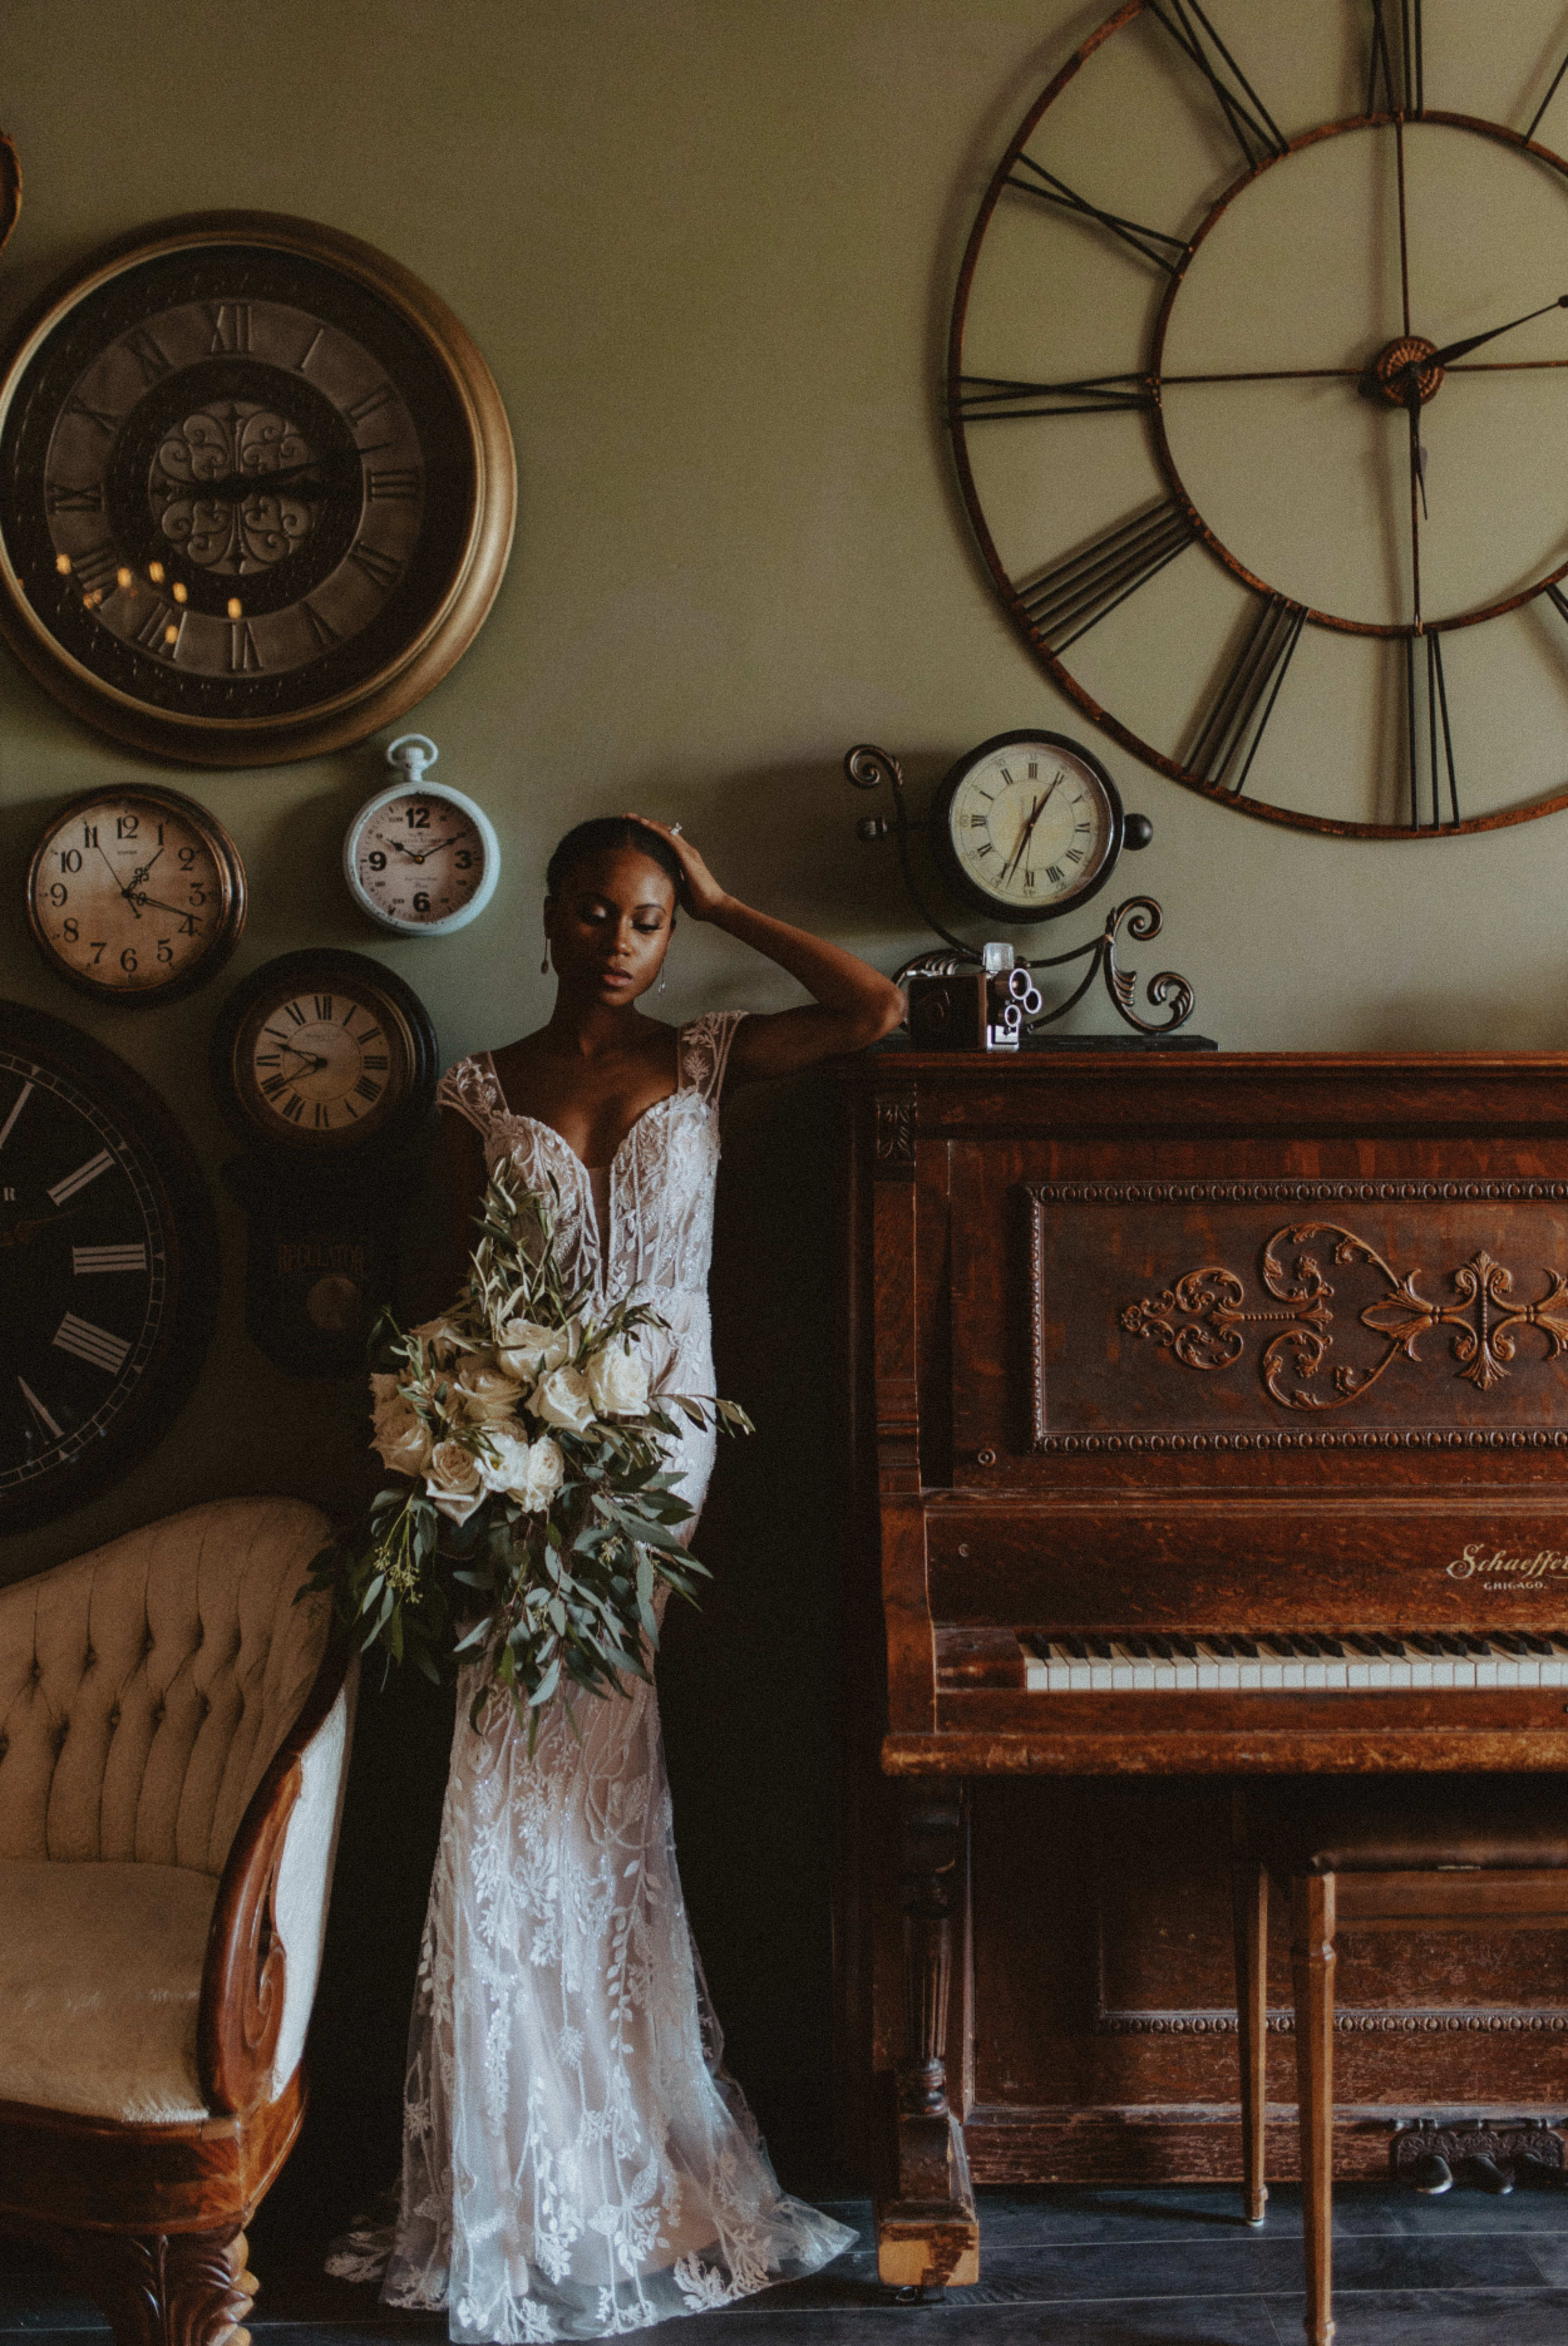 A rustic photoshoot featuring a woman in a wedding dress posing next to a piano surrounded by clocks.